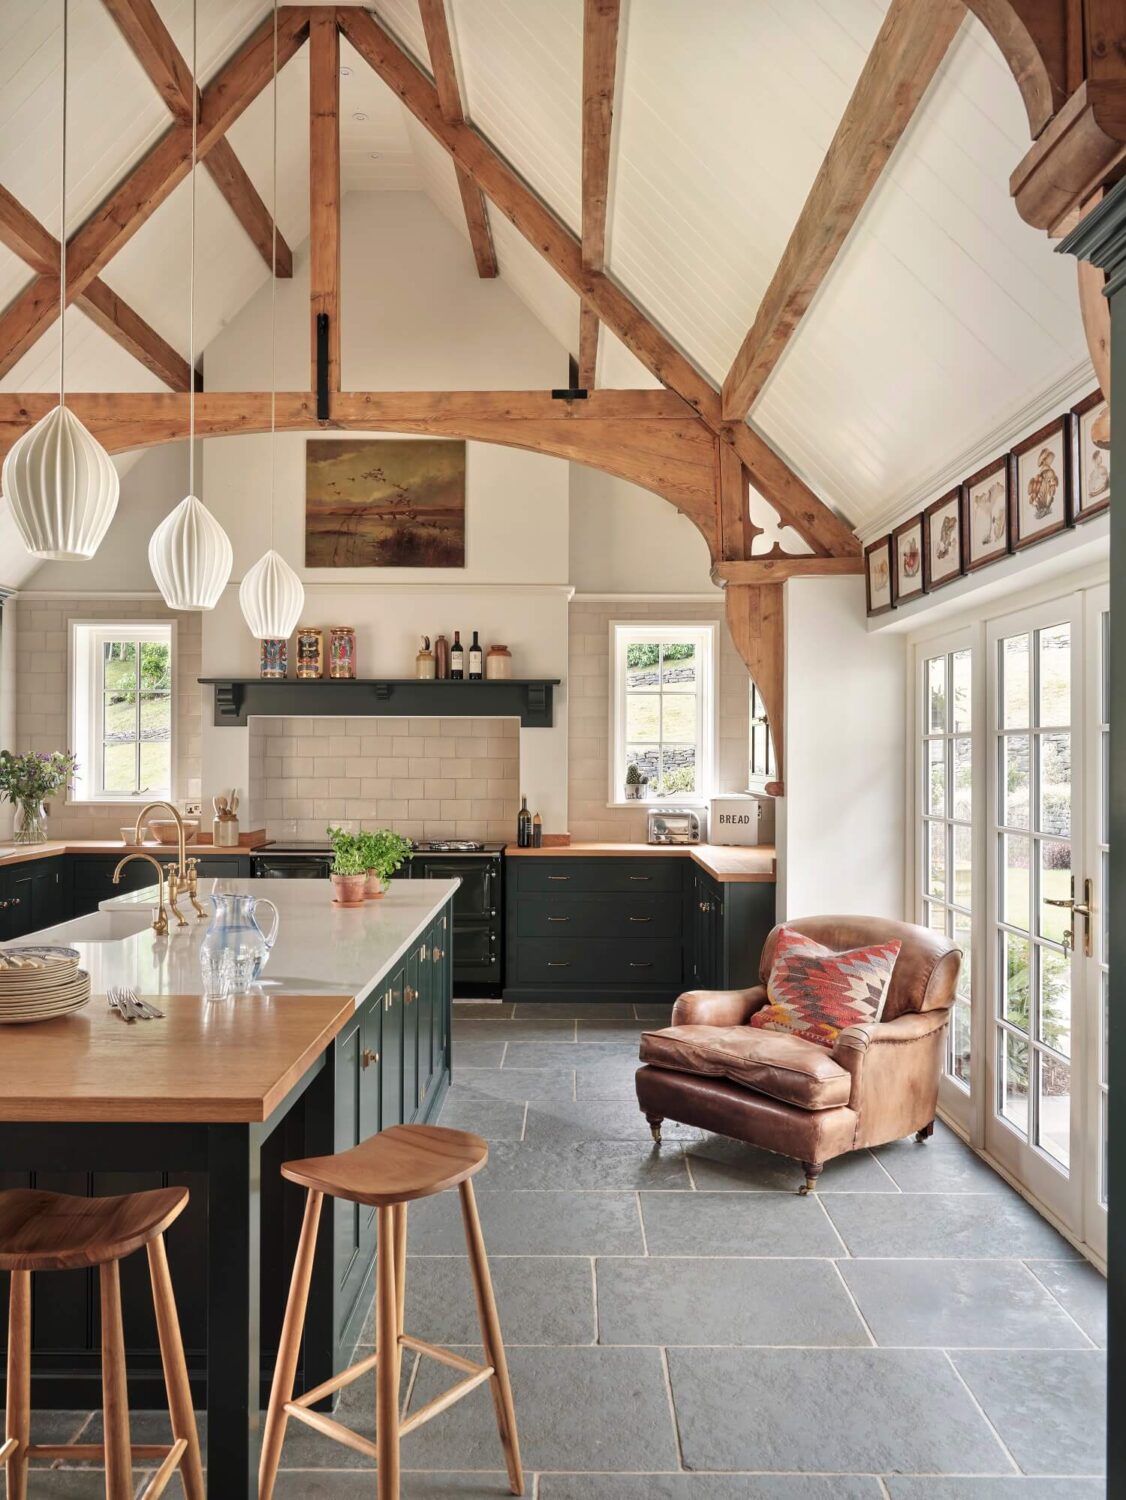 large-kitchen-island-flagstone-floor-leather-armchair-exposed-wooden-beams-devol-nordroom